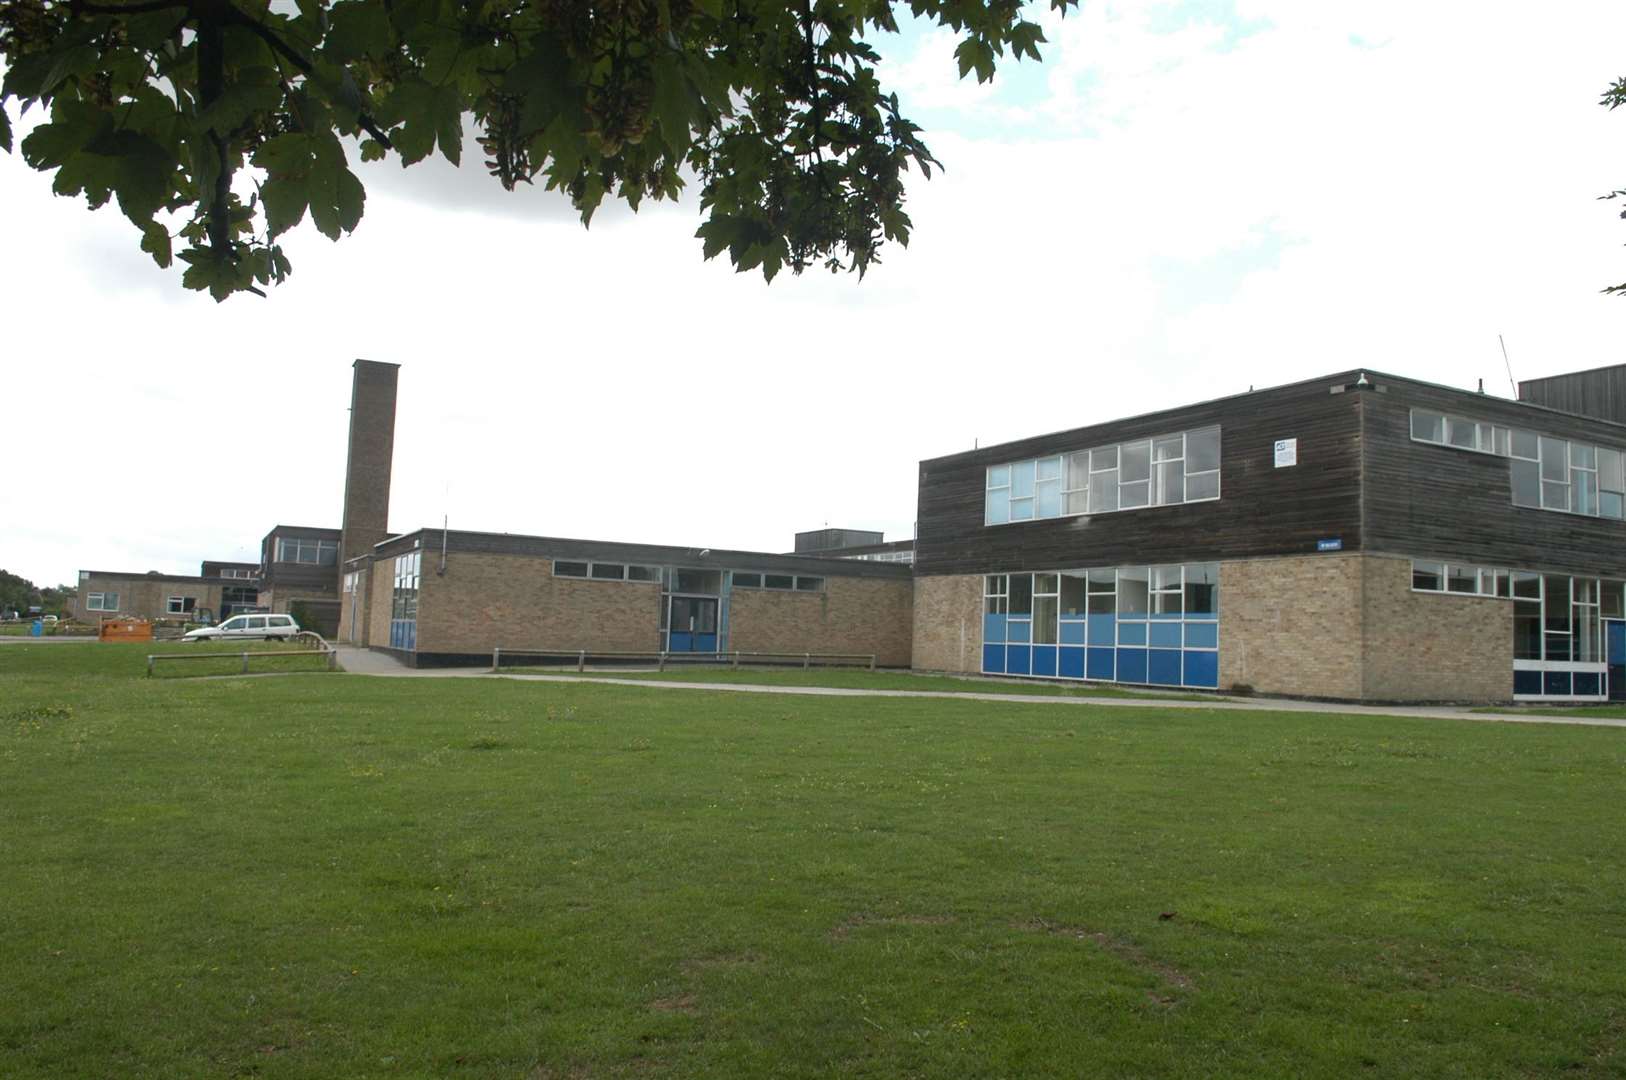 Oasis Academy, formerly known as Sheppey School, has had its share of problems but has many plus points, says a former pupil